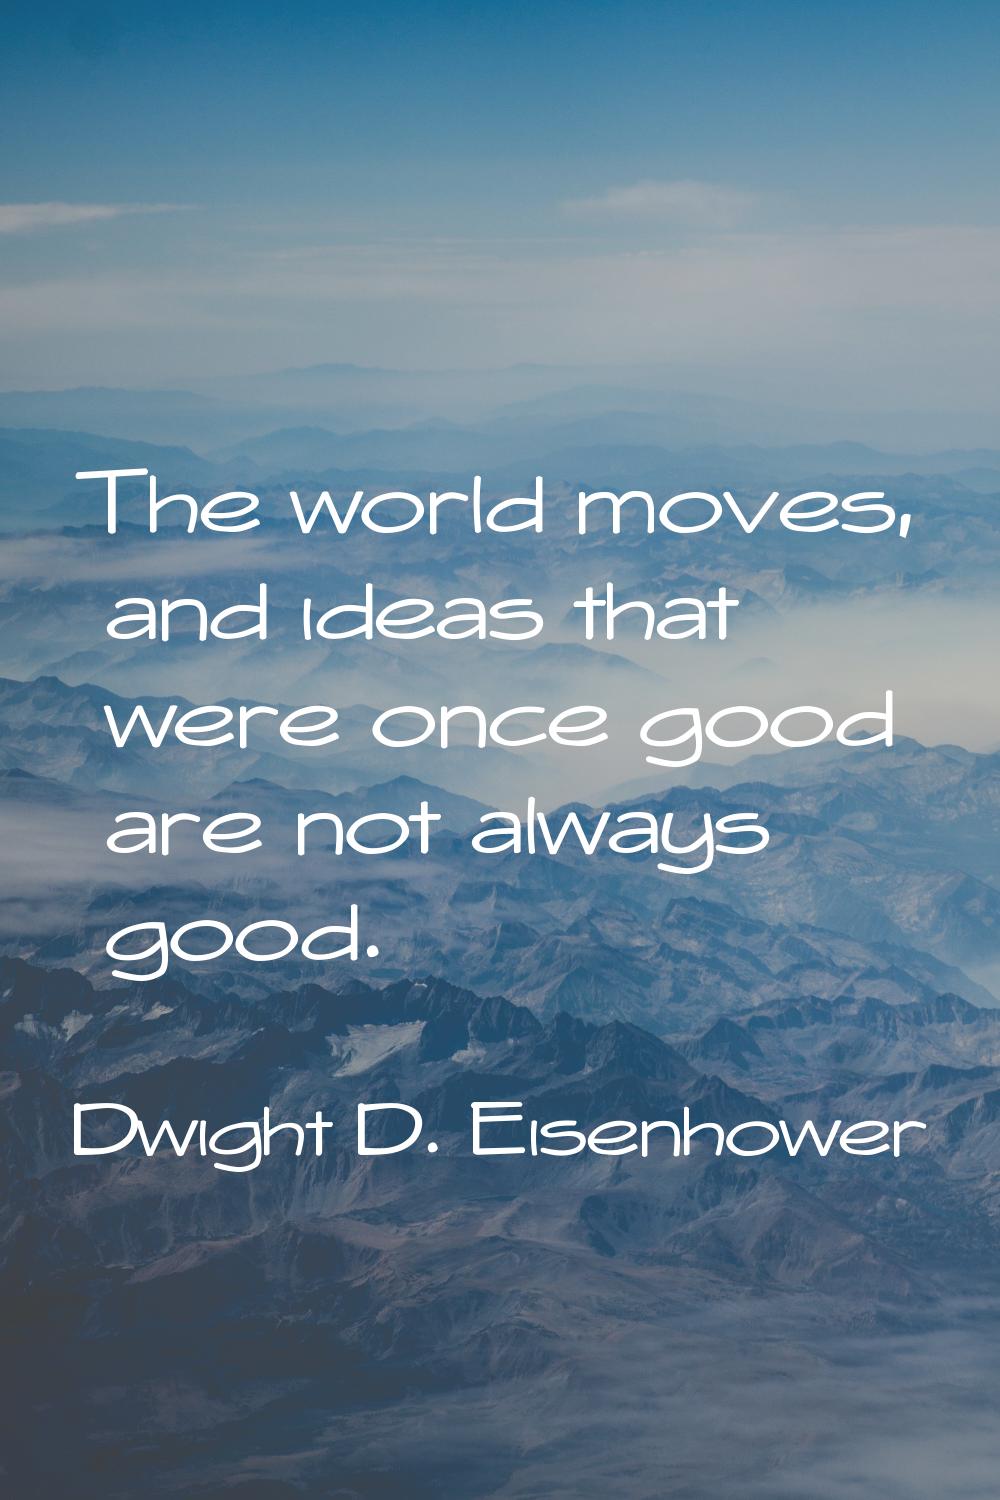 The world moves, and ideas that were once good are not always good.